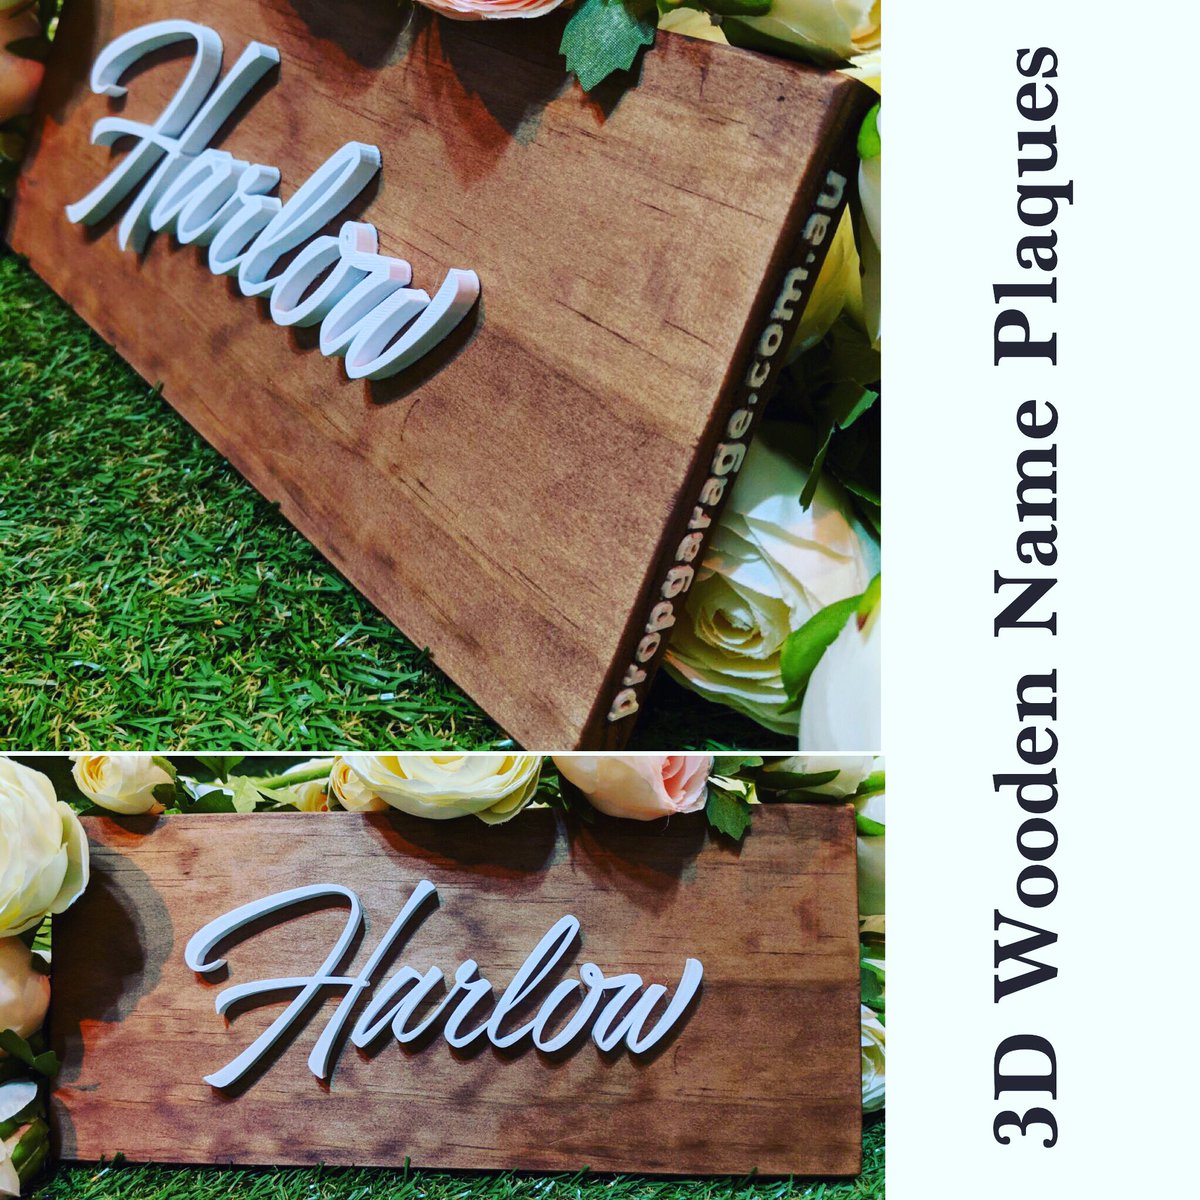 Hand-made personalised 3D Wooden Name Plaques and Wedding Signages available at Prop Garage!

#propgarage #woodenname #nameplaque #handmade #personalisedgifts #weddingsigns #woodenweddingsigns #3dprinting #3dsigns #walnutstain #weddinginspiration #birthdaypresent #customsigns